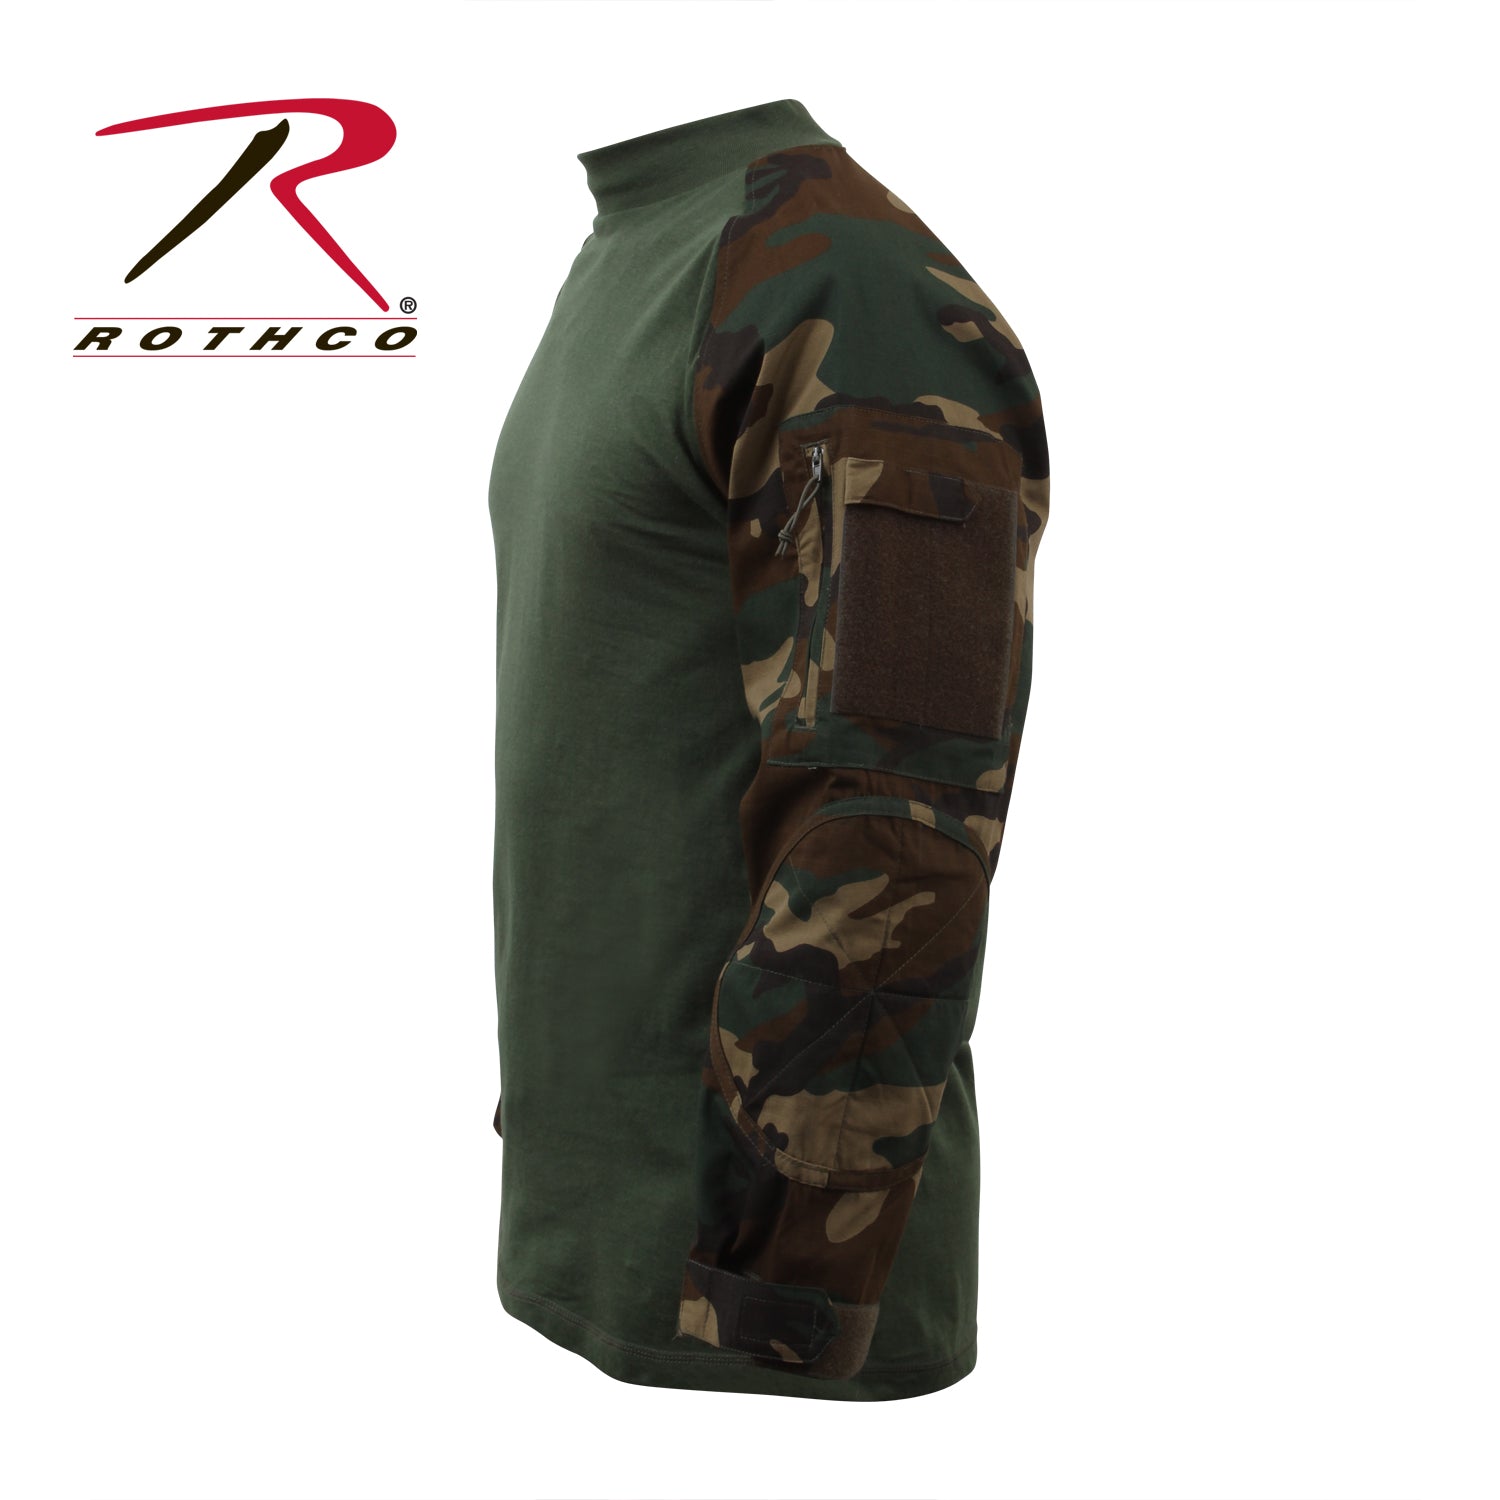 Rothco Military NYCO FR Fire Retardant Combat Shirt - Woodland Camo - Eminent Paintball And Airsoft